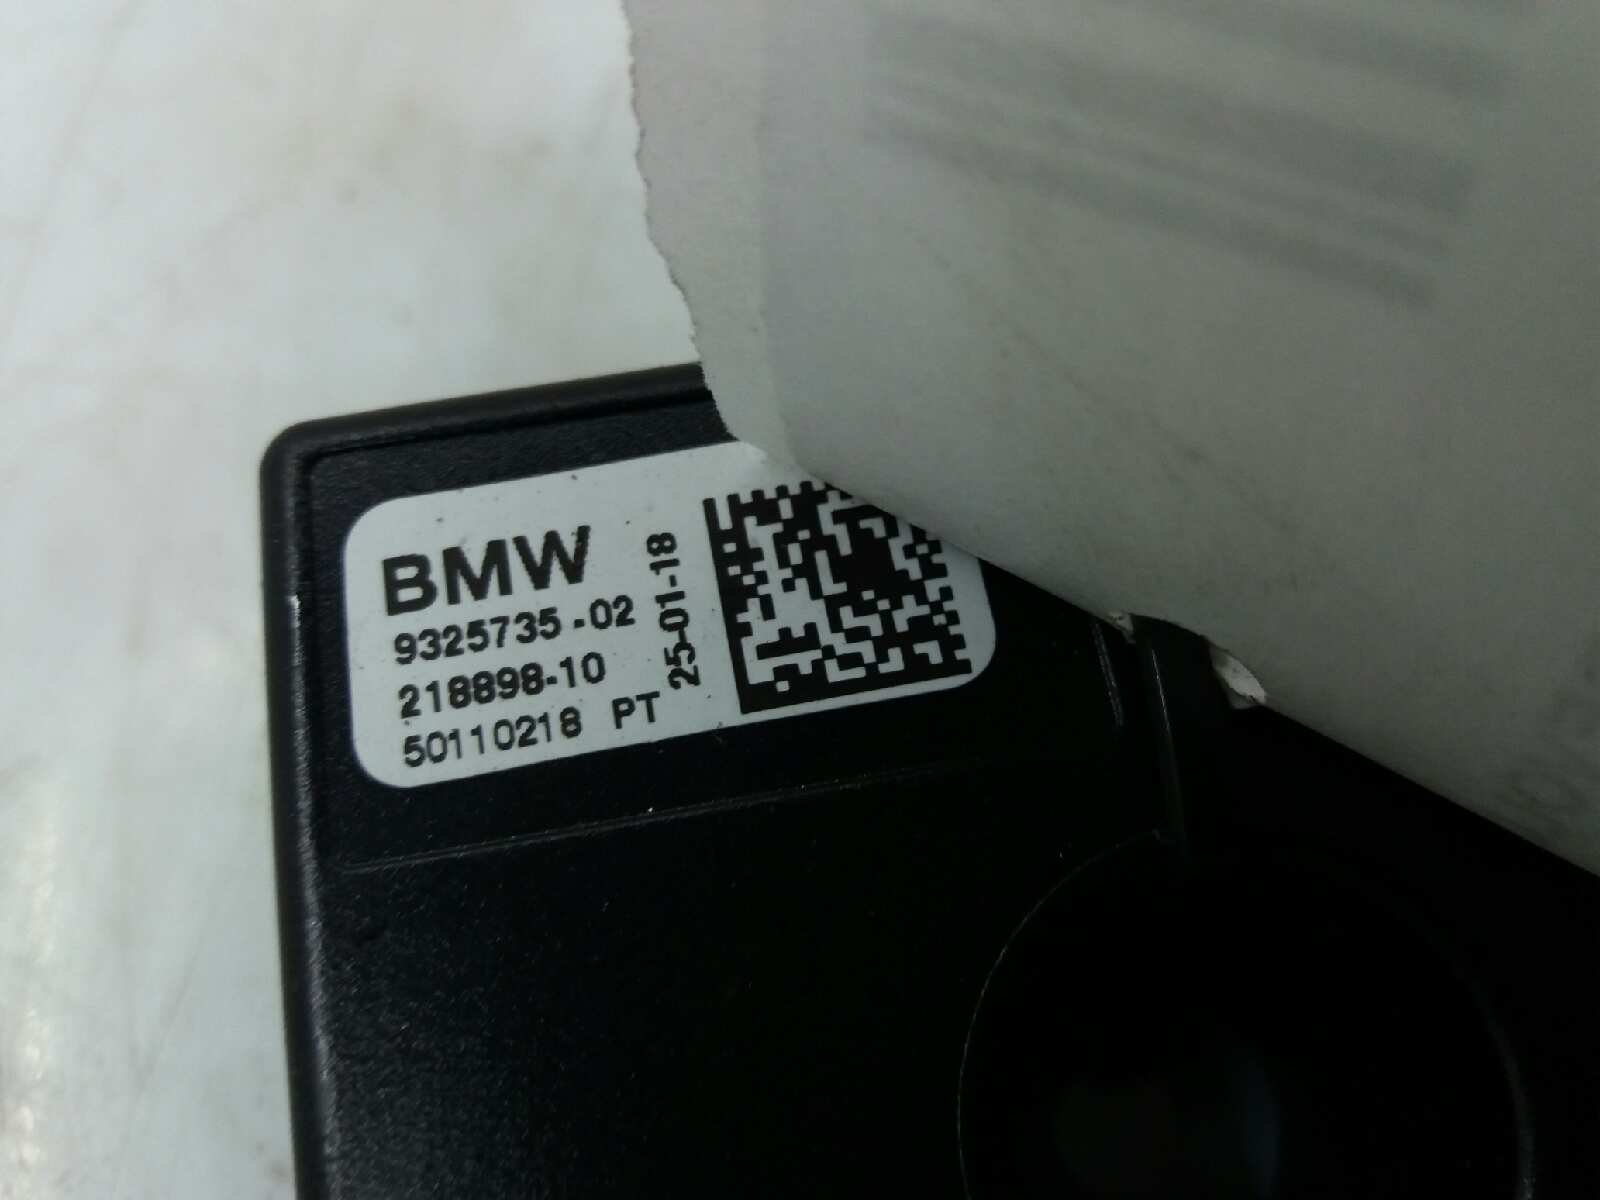 BMW 1 Series F20/F21 (2011-2020) Other part 932573502 24773598